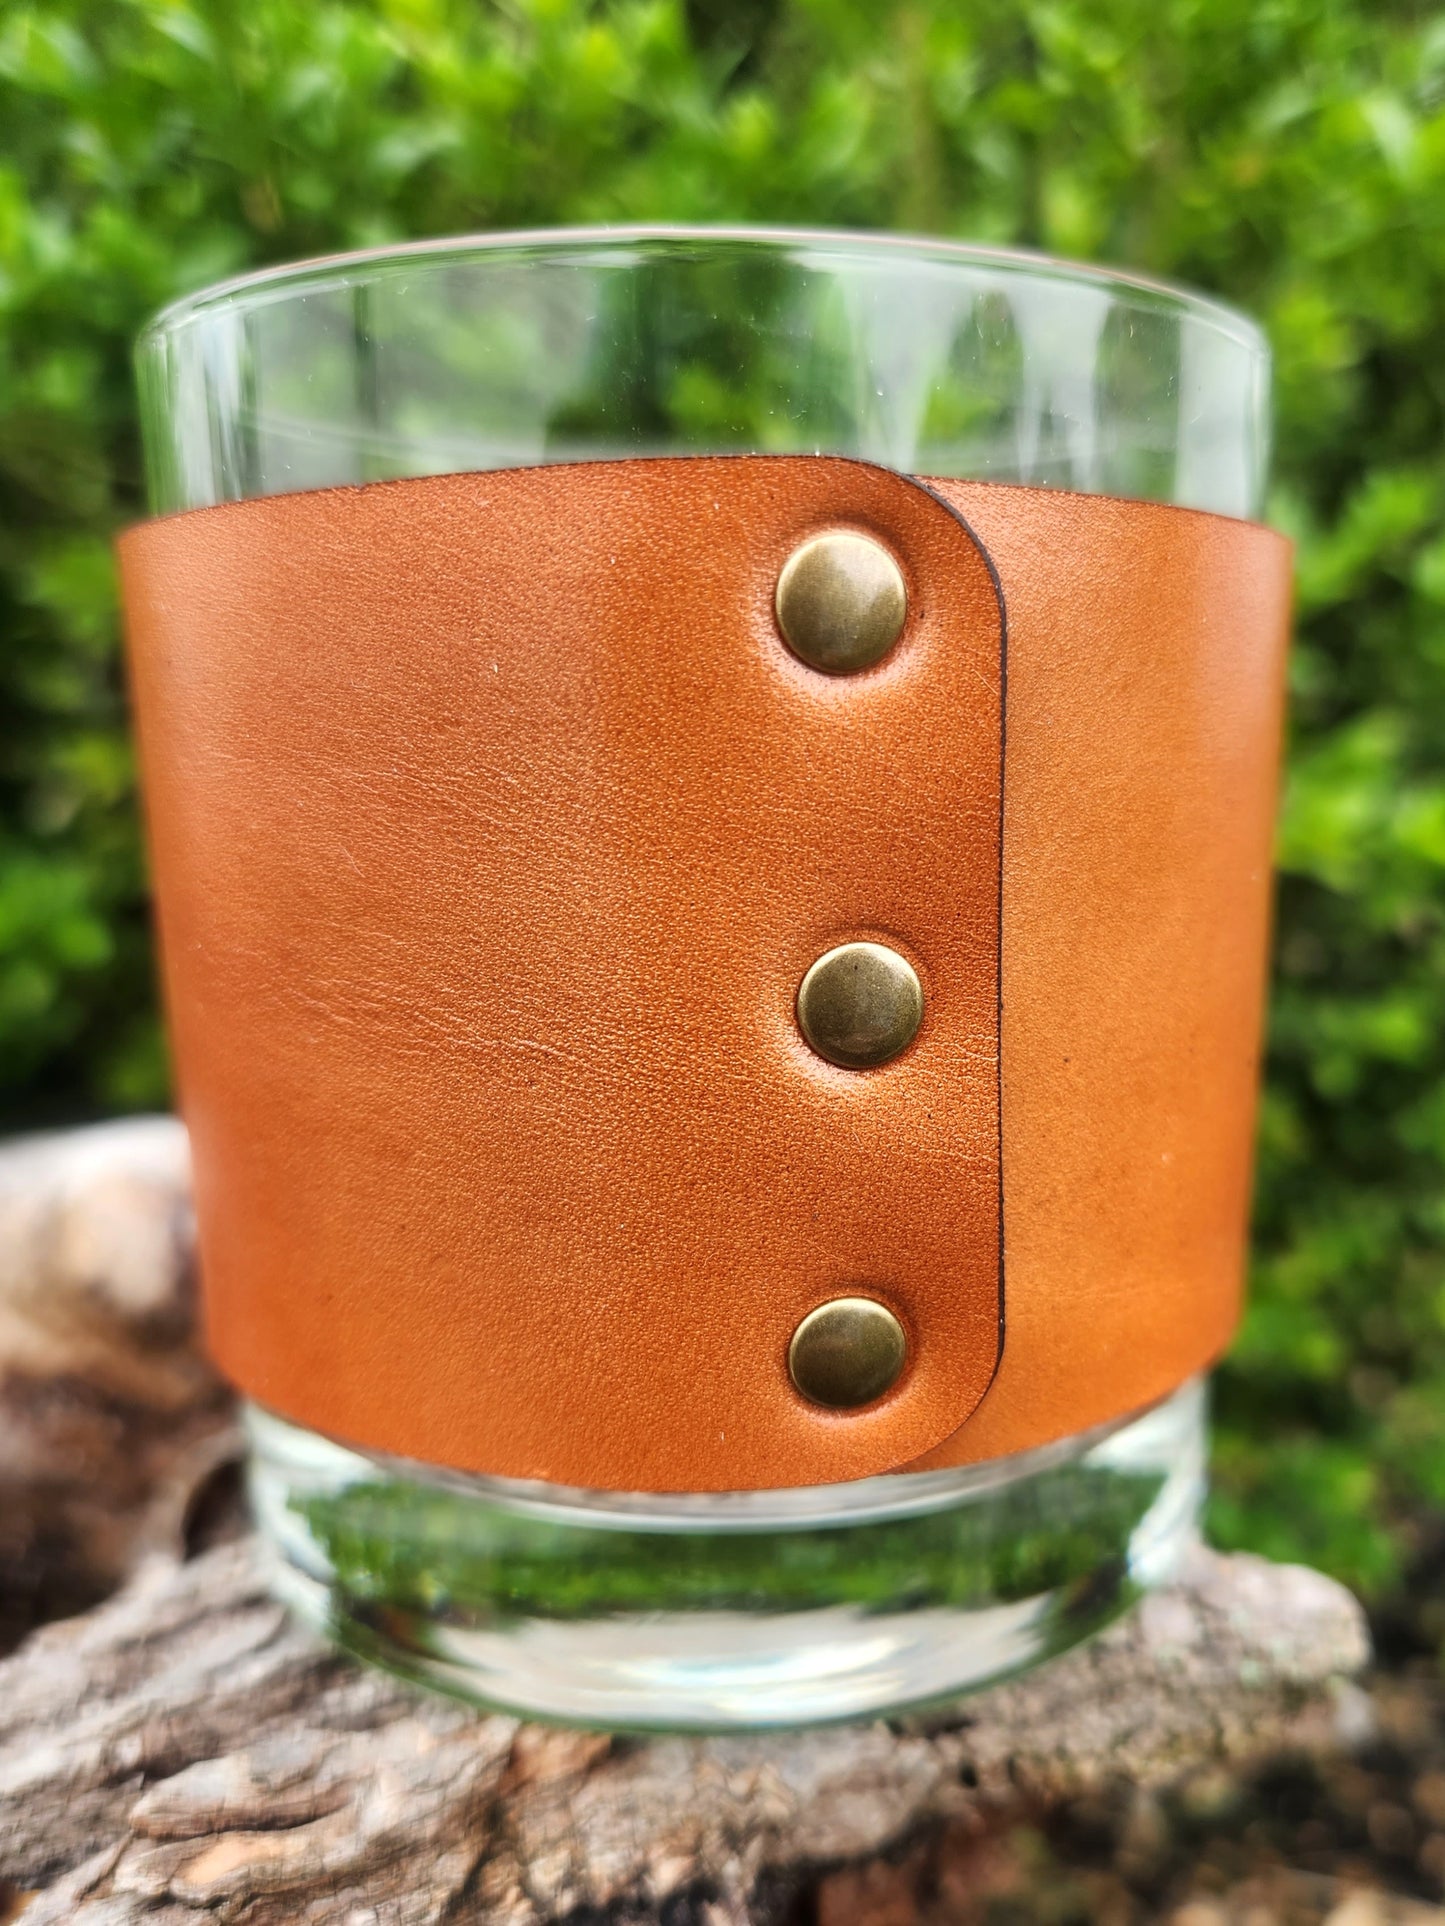 Whiskey rocks glass with engraved Leather wrap - Custom Barware